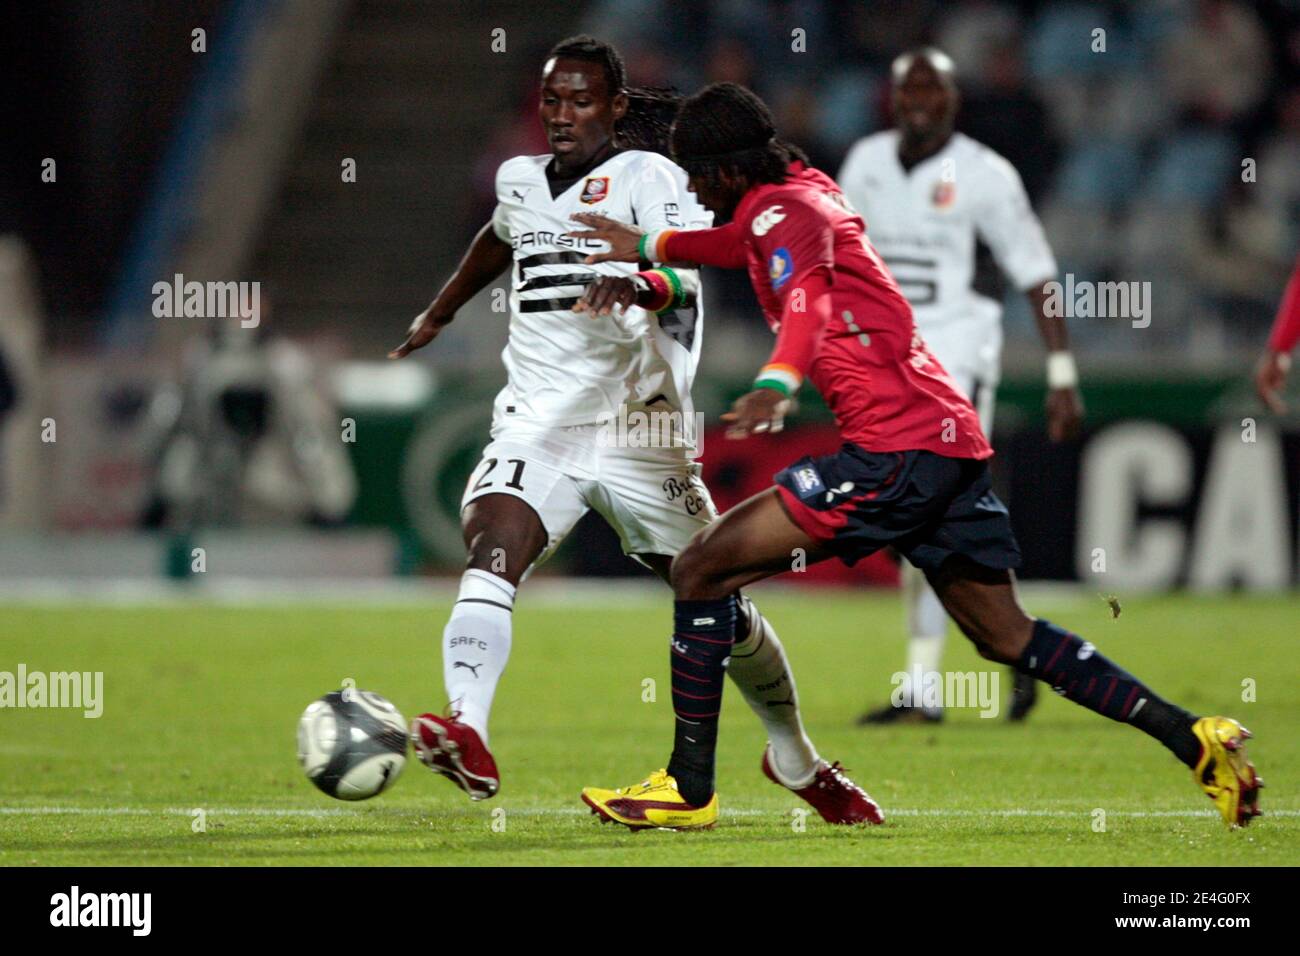 Lille's Gervinho fights for the ball with Rennes' Ismael Bangoura during the French First League Soccer Match, Lille OSC vs Stade Rennais at Lille Metropole Stadium in Lille, north of France on October 17, 2009. The match ended in a 0-0 draw. Photo by Mik Stock Photo